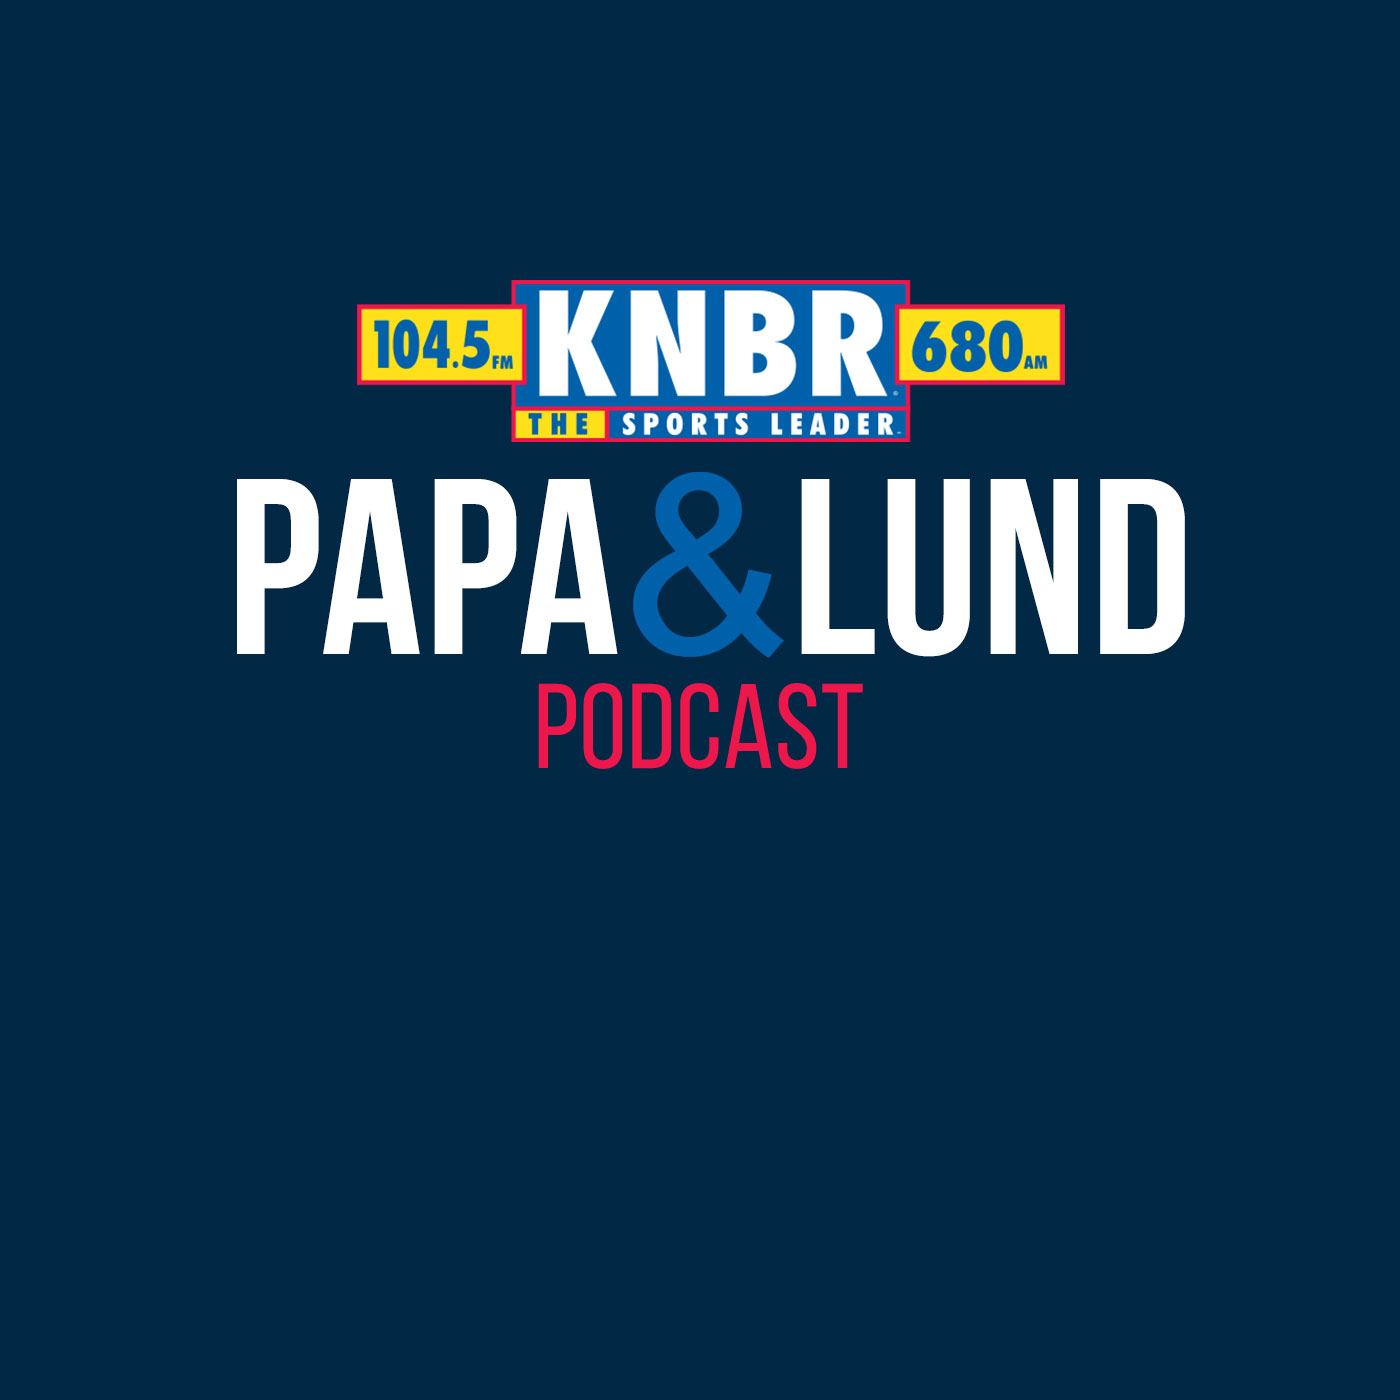 7-29 Giants starting pitcher and Bay Area local Logan Webb on the Papa & Lund Show